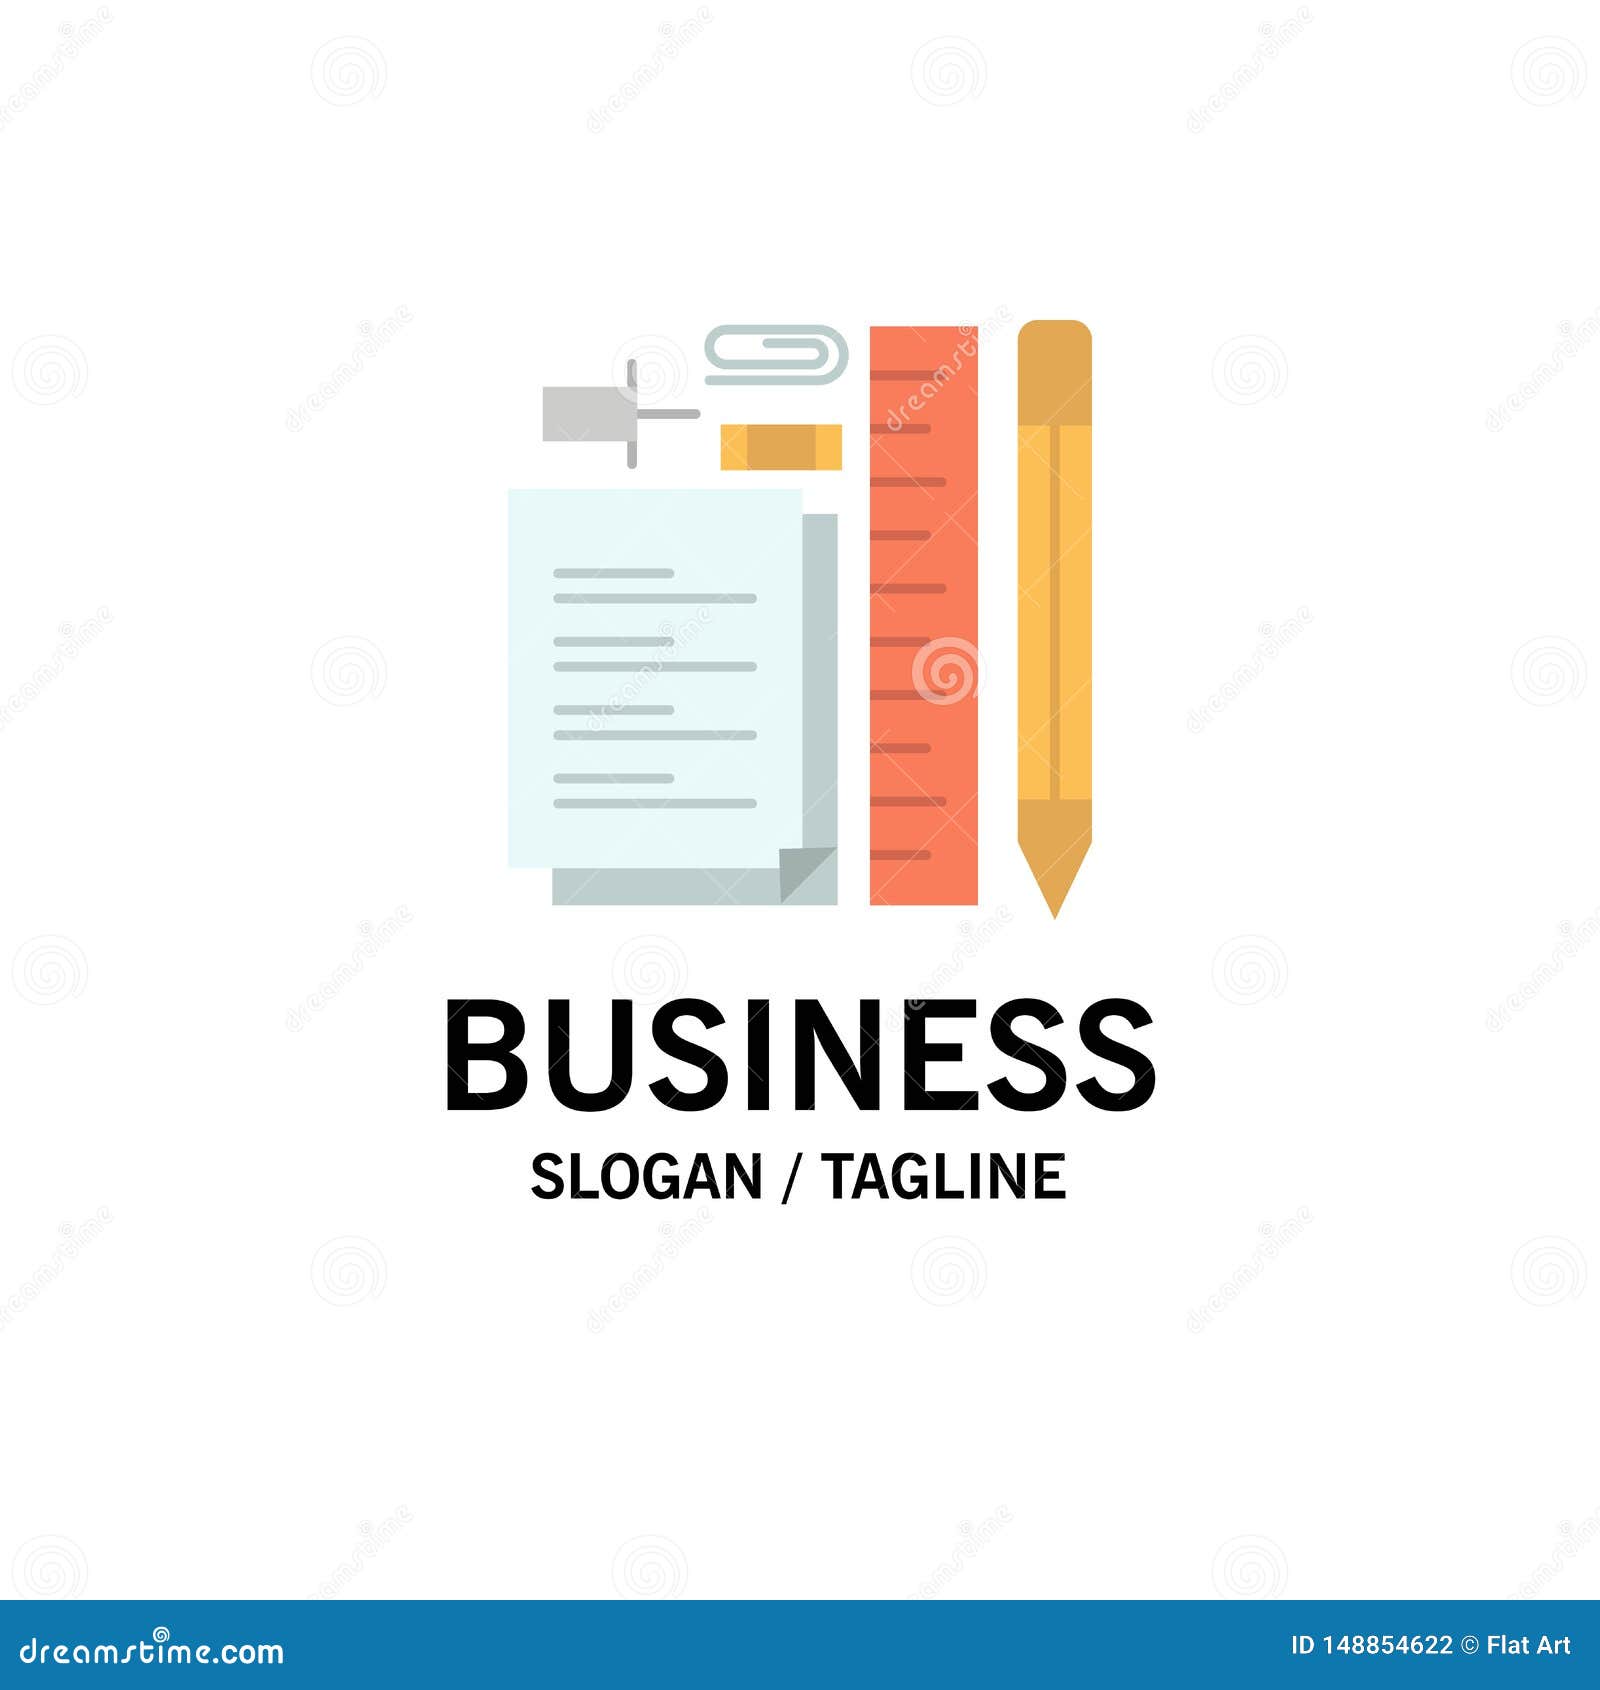 stationary, pencil, pen, notepad, pin business logo template. flat color